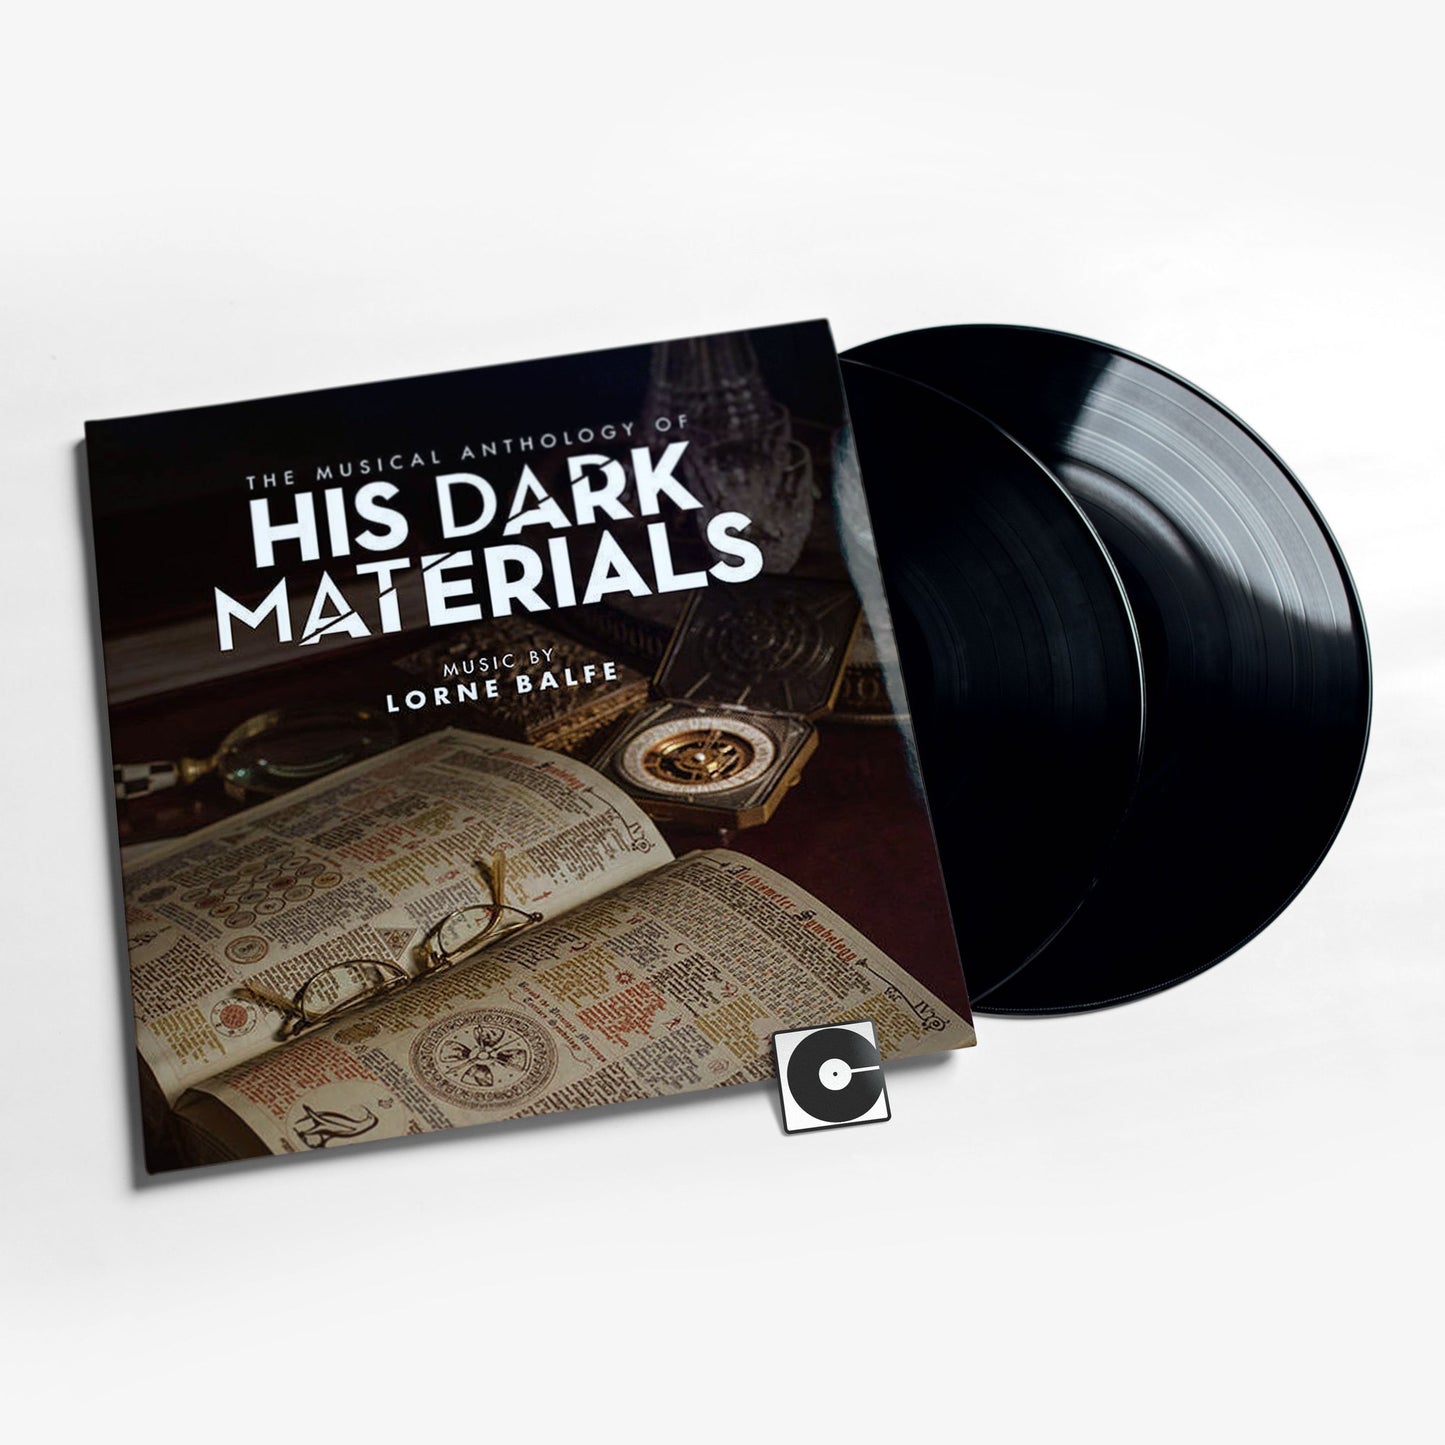 Lorne Balfe - "The Musical Anthology Of His Dark Materials"